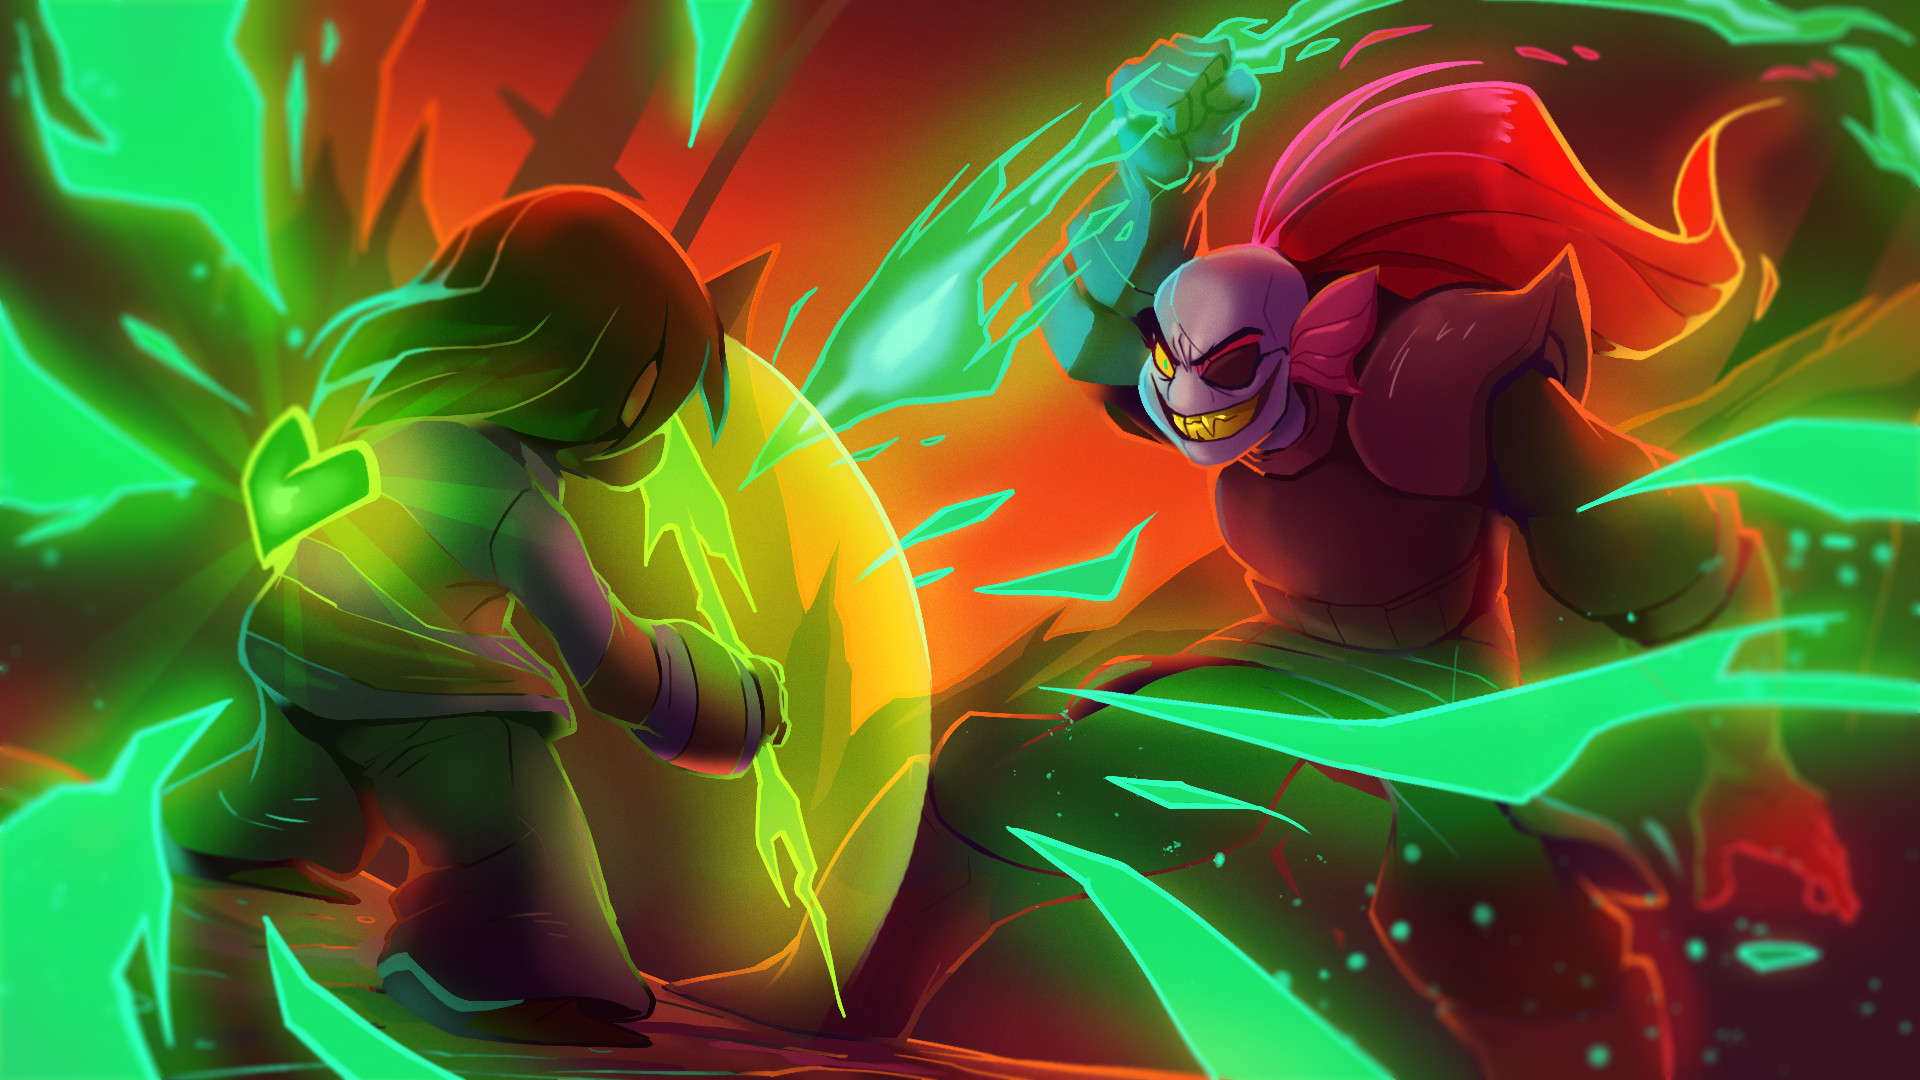 1920x1080 Undertale Wallpapers (boss battles of genocide, neutral, and pacifist  endings)